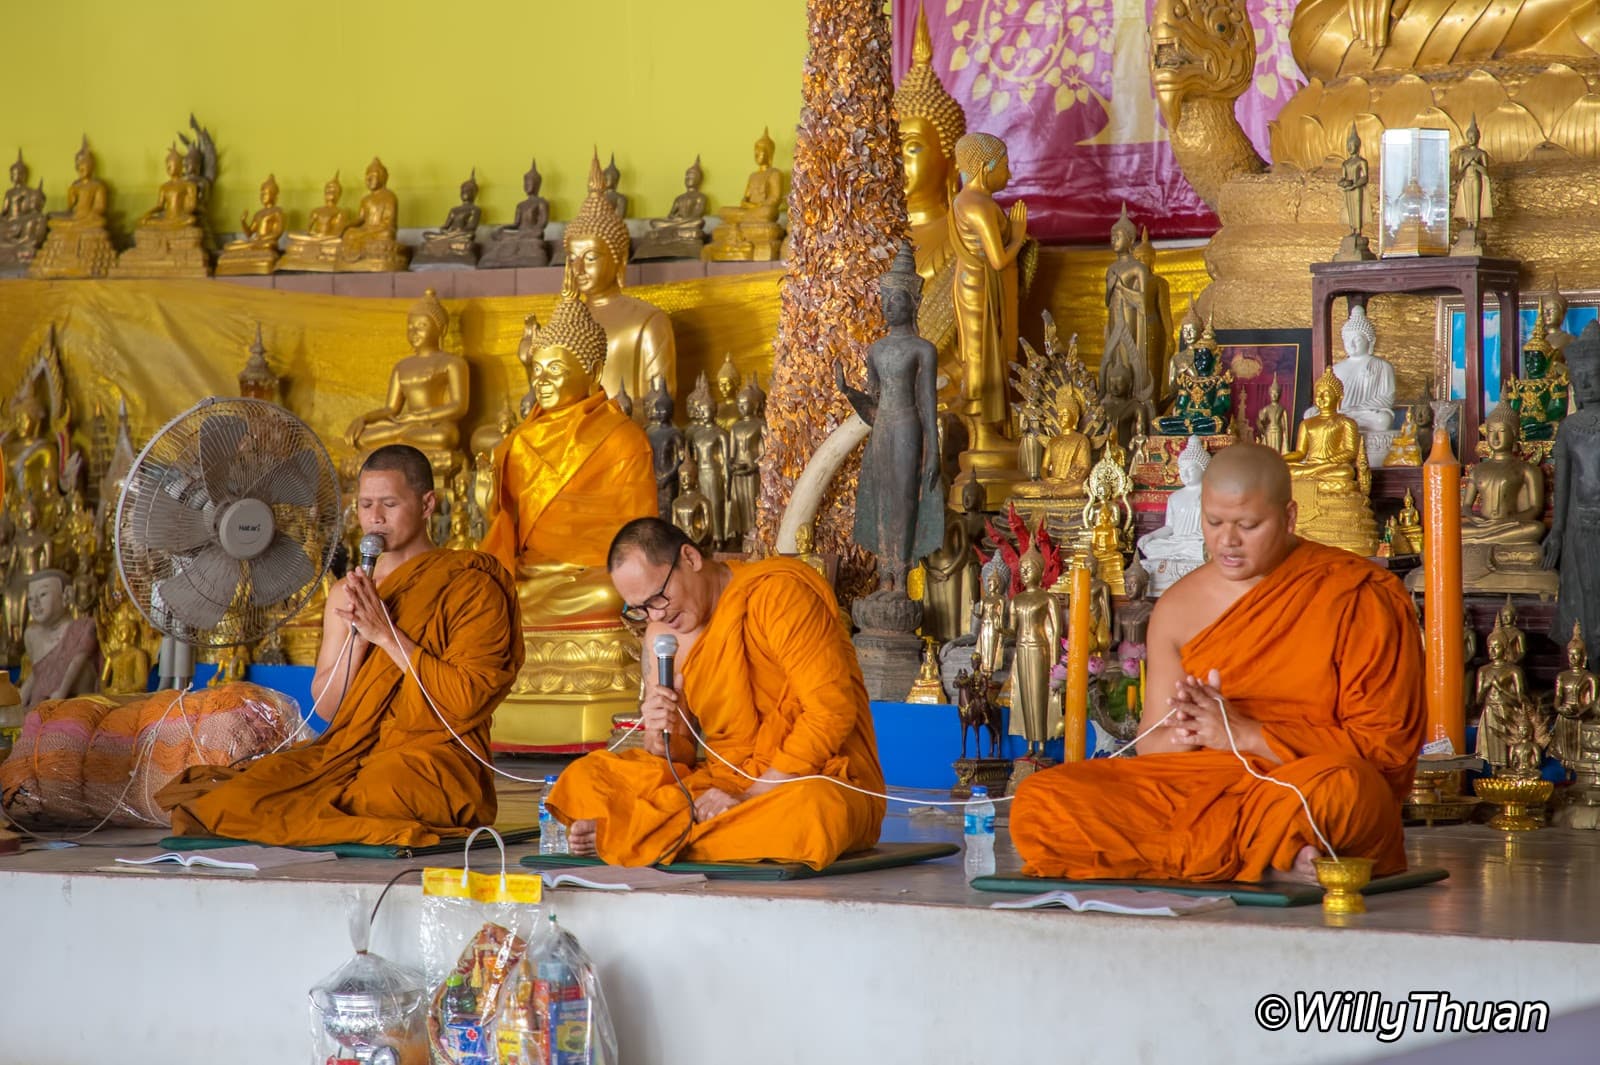 Monks during a special occasion at Big Buddha, Phuket